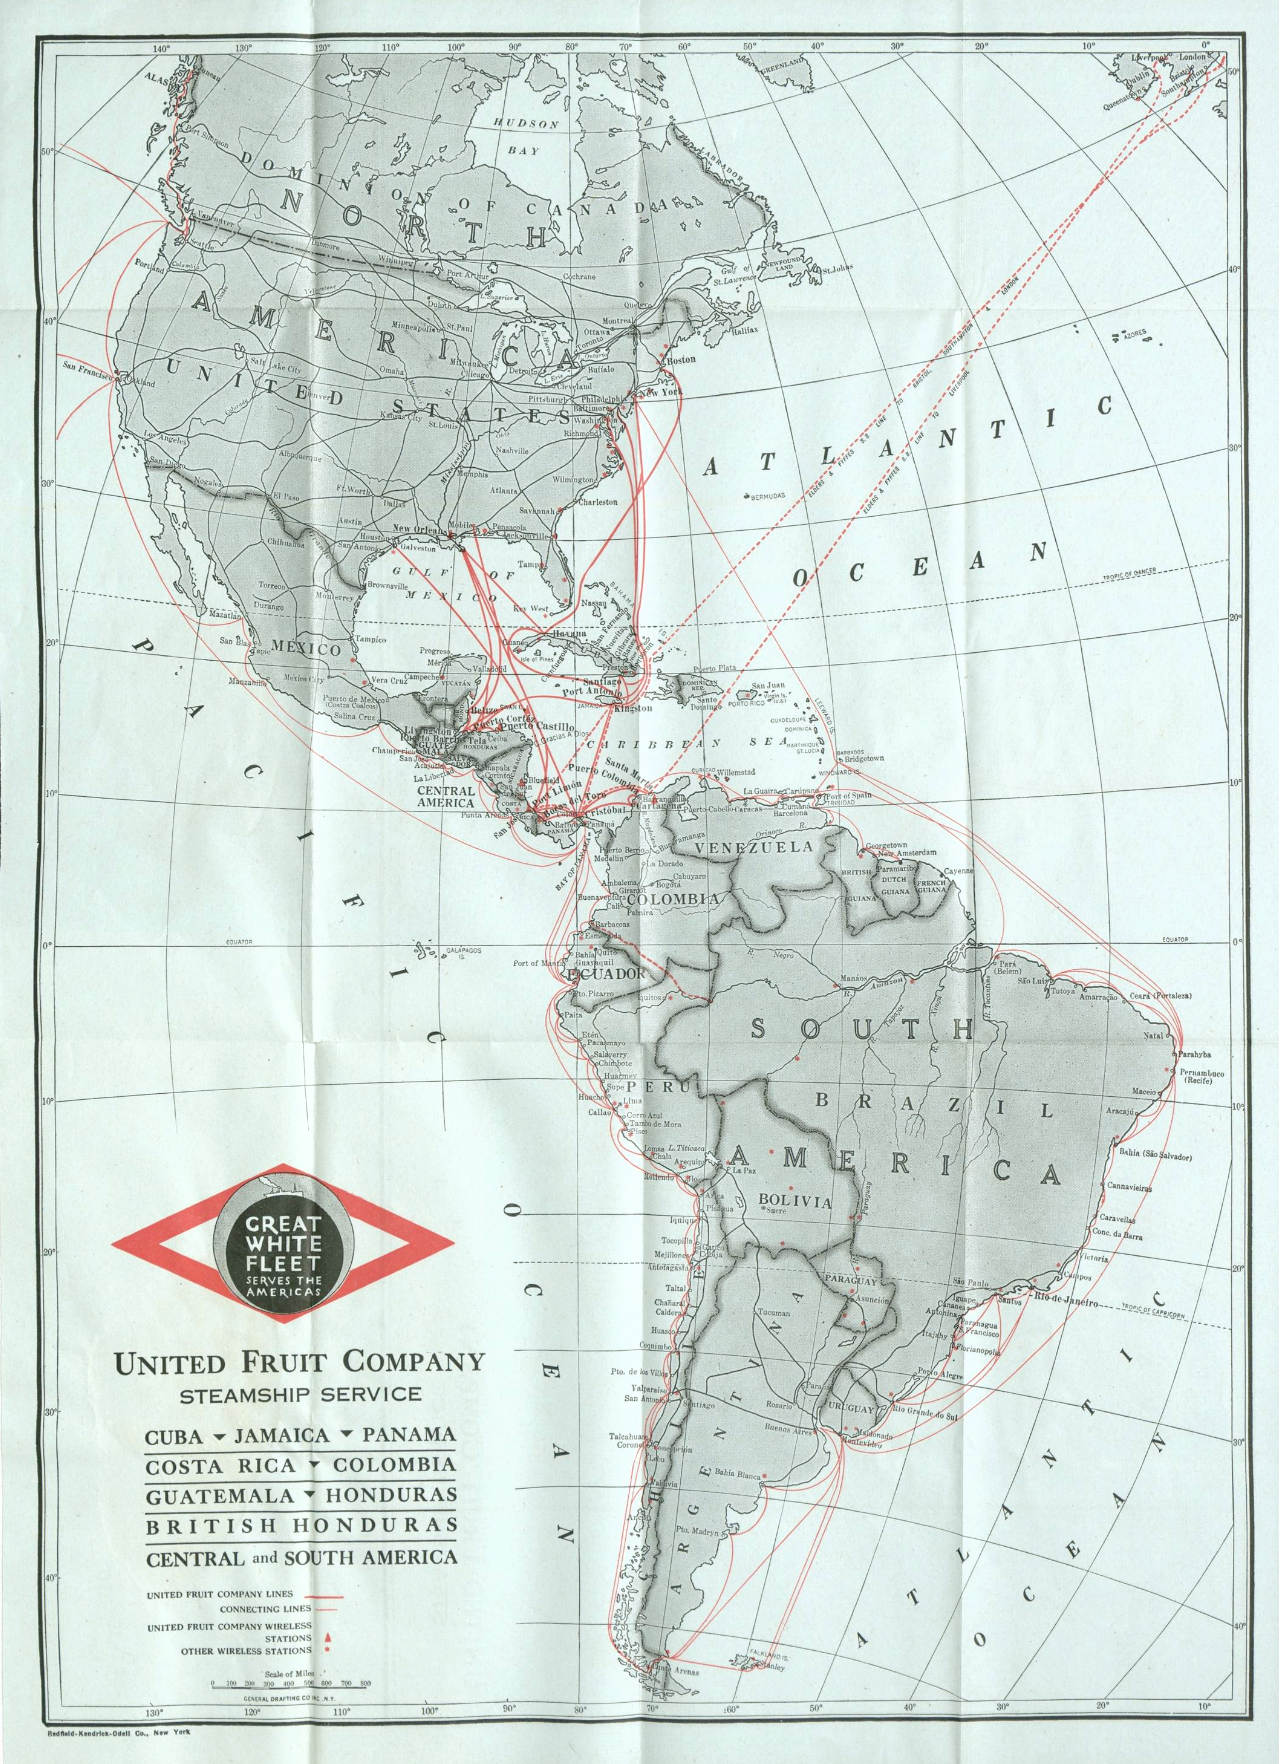 Map of the routes of United Fruit Company steam ship service